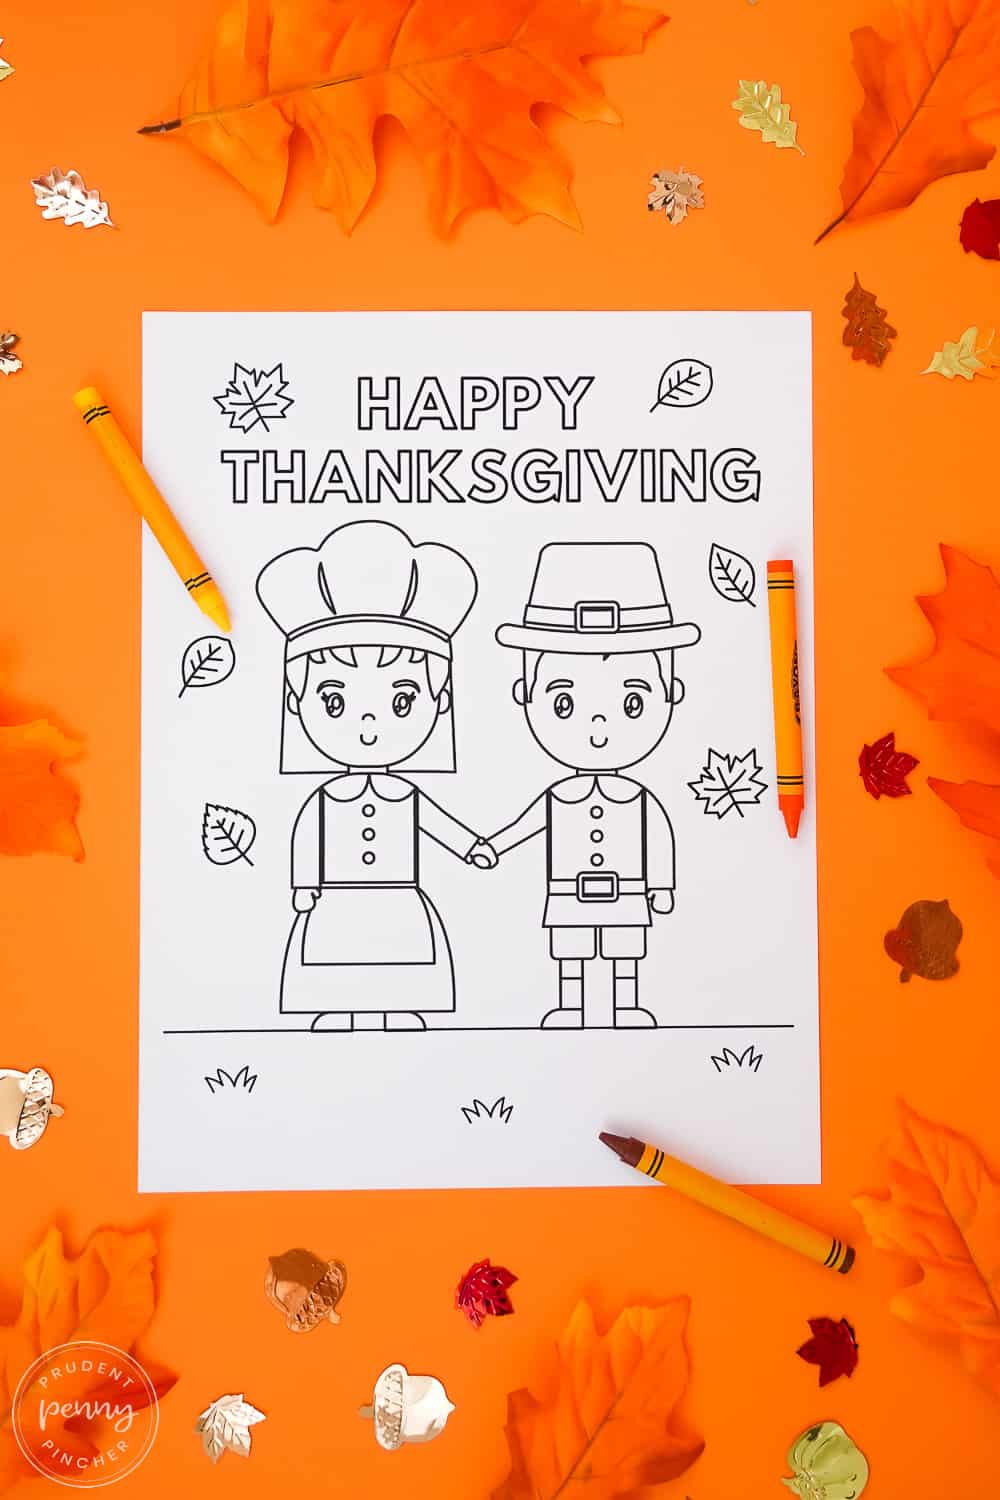 coloring page of thanksgiving pilgrims holding hands